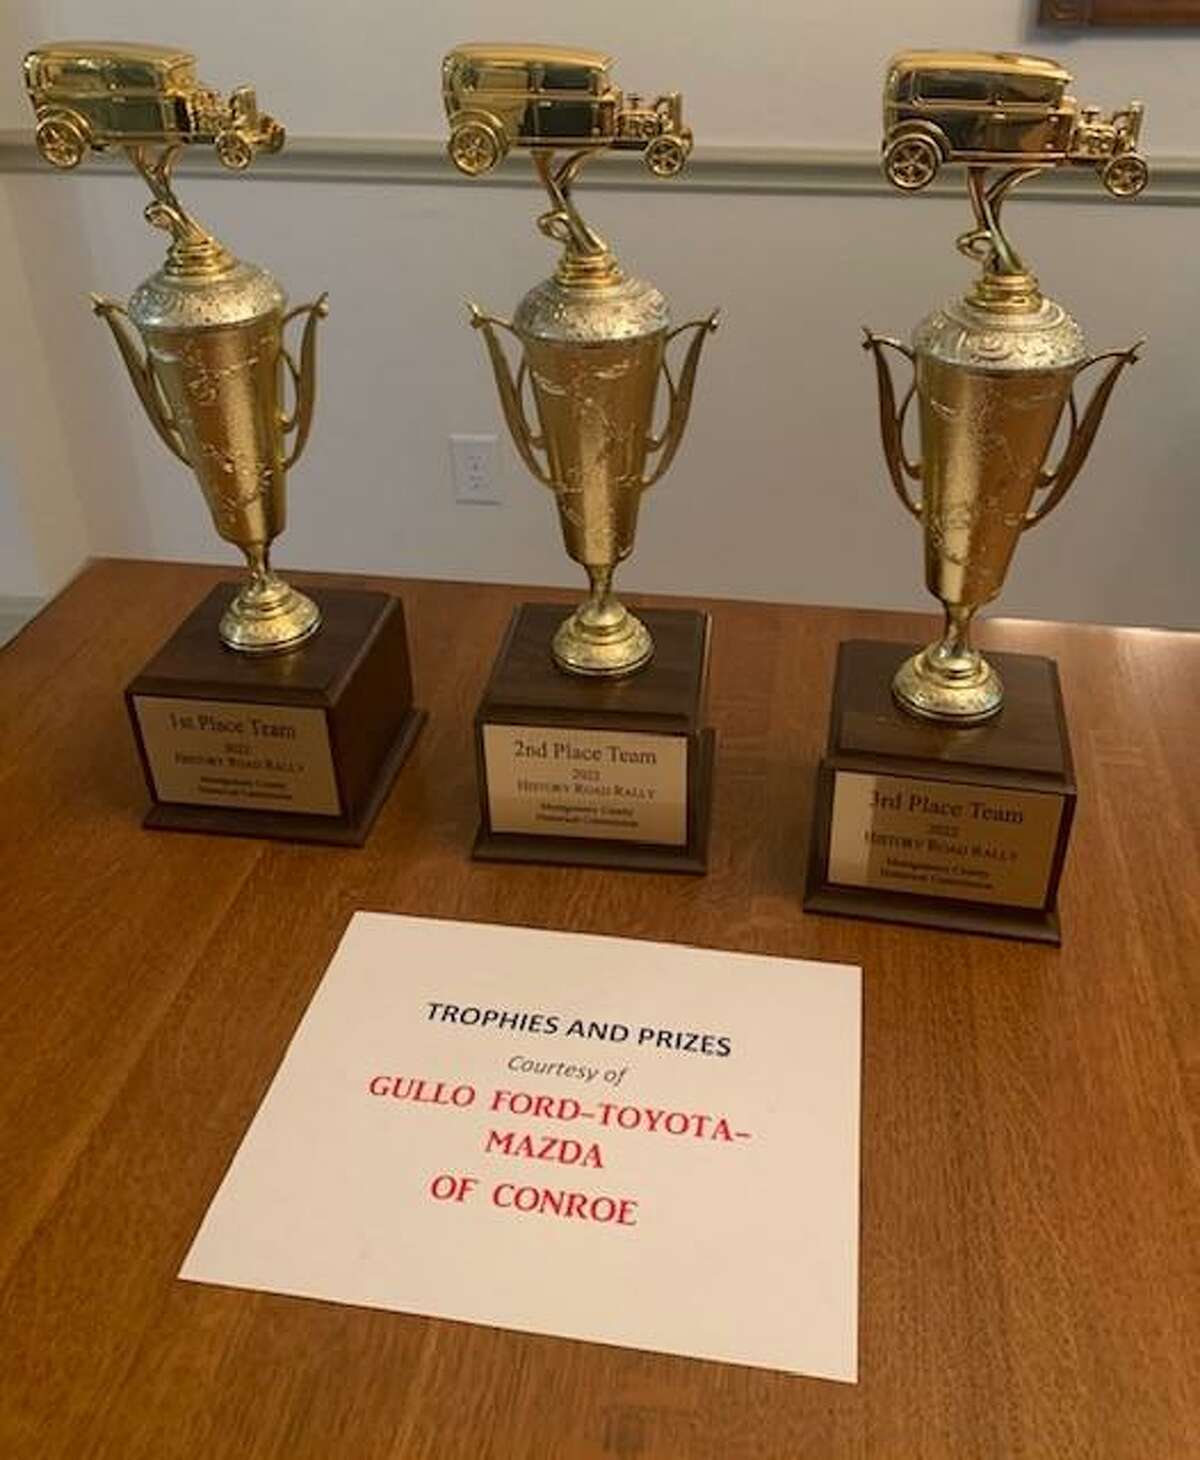 The 9th Annual History Road Rally took place in Magnolia on Jan. 29. The Scott team took top honors in the competition. Pictured are the winner trophies.